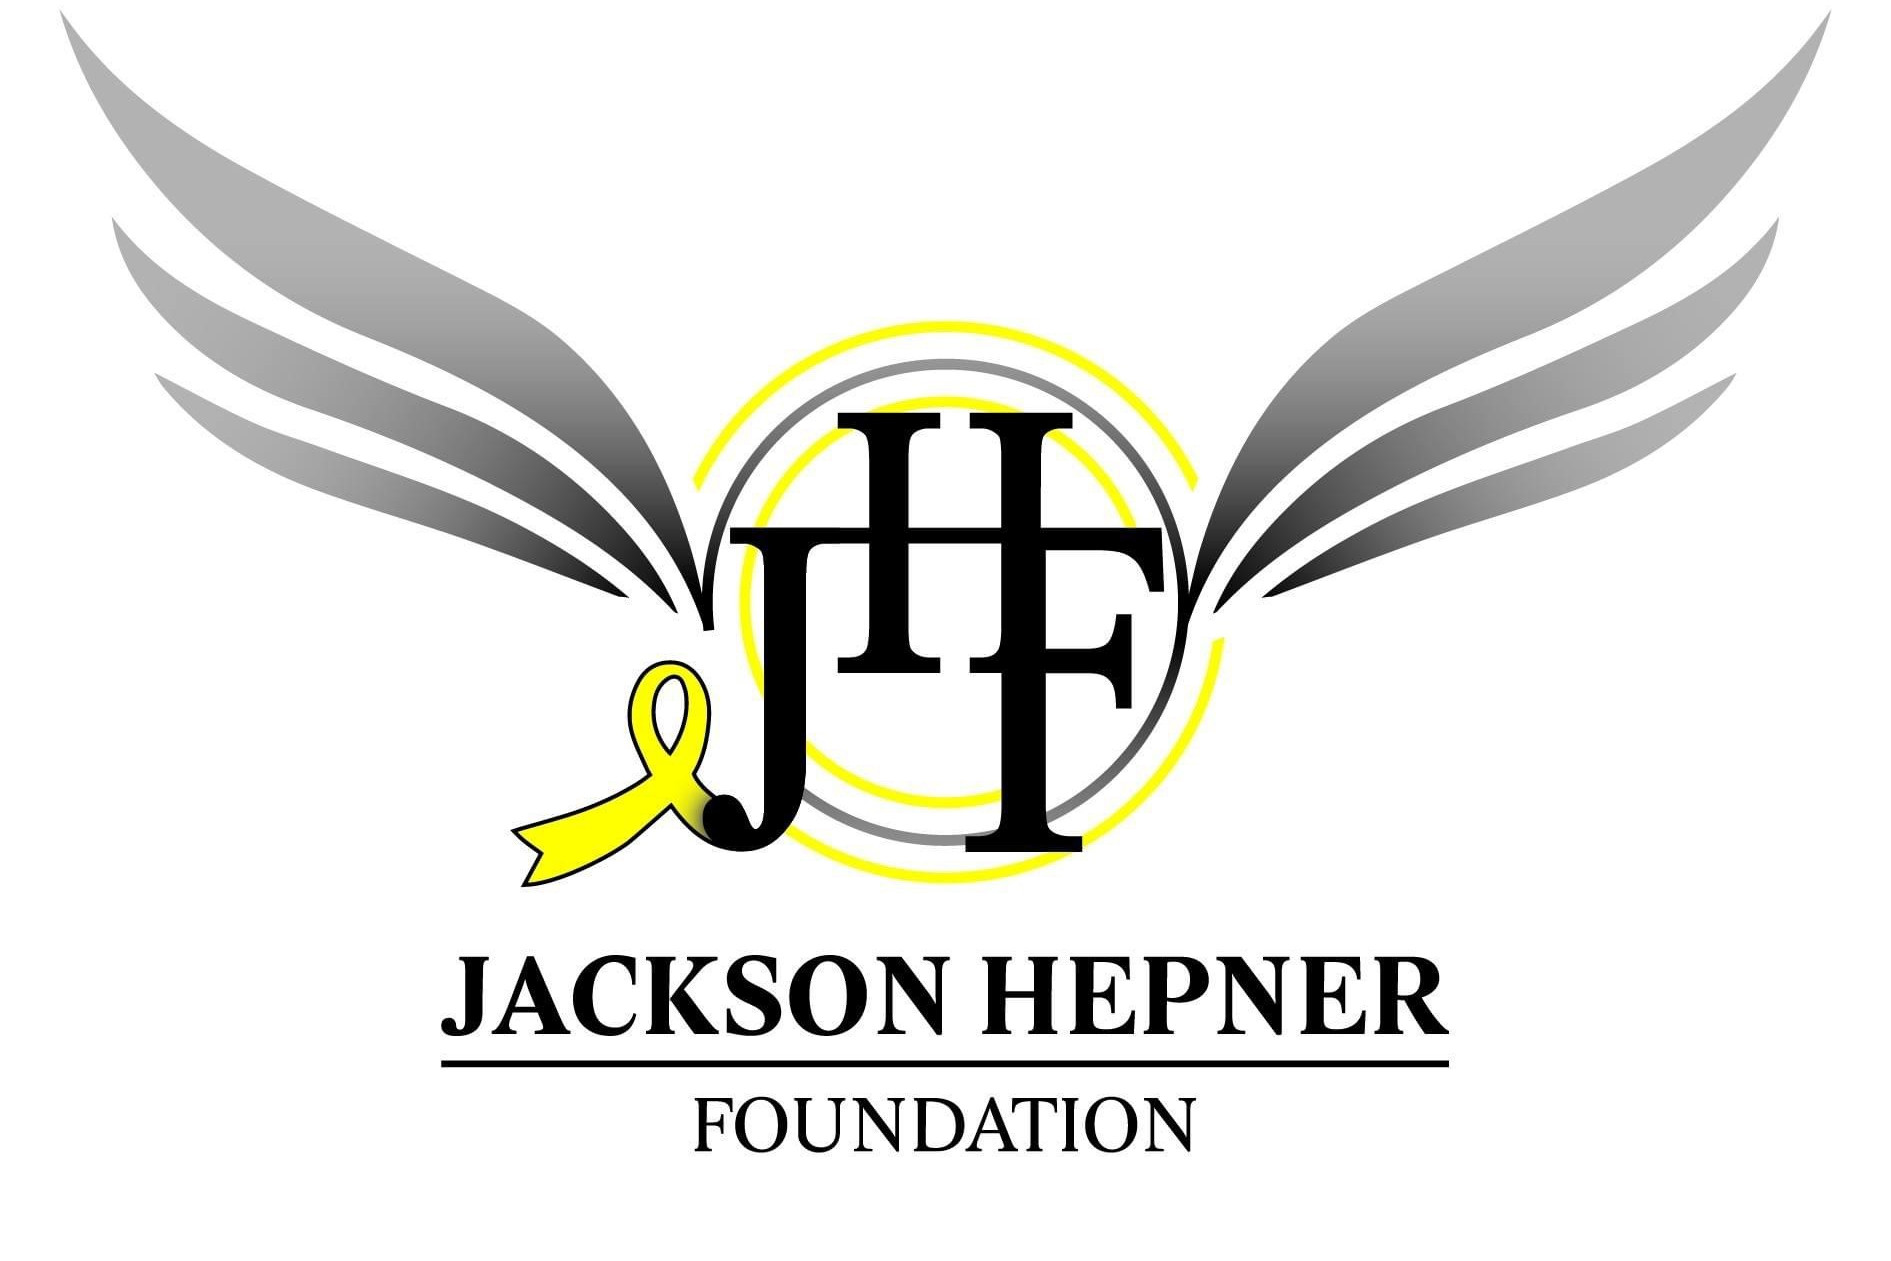 Gearing up for the fourth annual Jackson Hepner Memorial Drive - feature photo